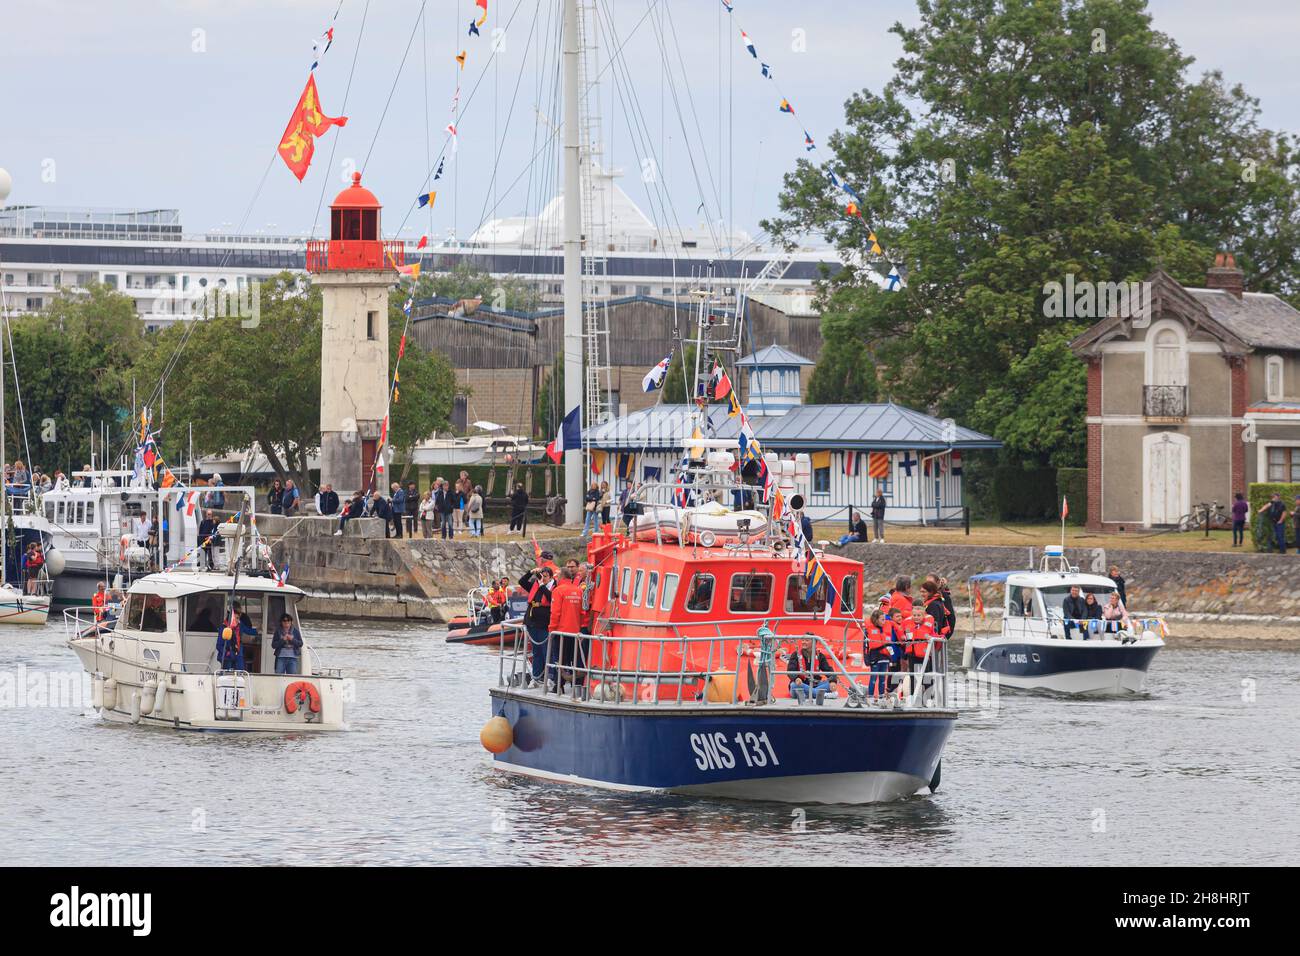 France, Calvados (14), Pays d'Auge, Honfleur, arrival of a boat from the Société Nationale de Sauvetage en Mer (SNSM), French Coast Guards, for the Sailors Festival which takes place every year at Pentecost Stock Photo